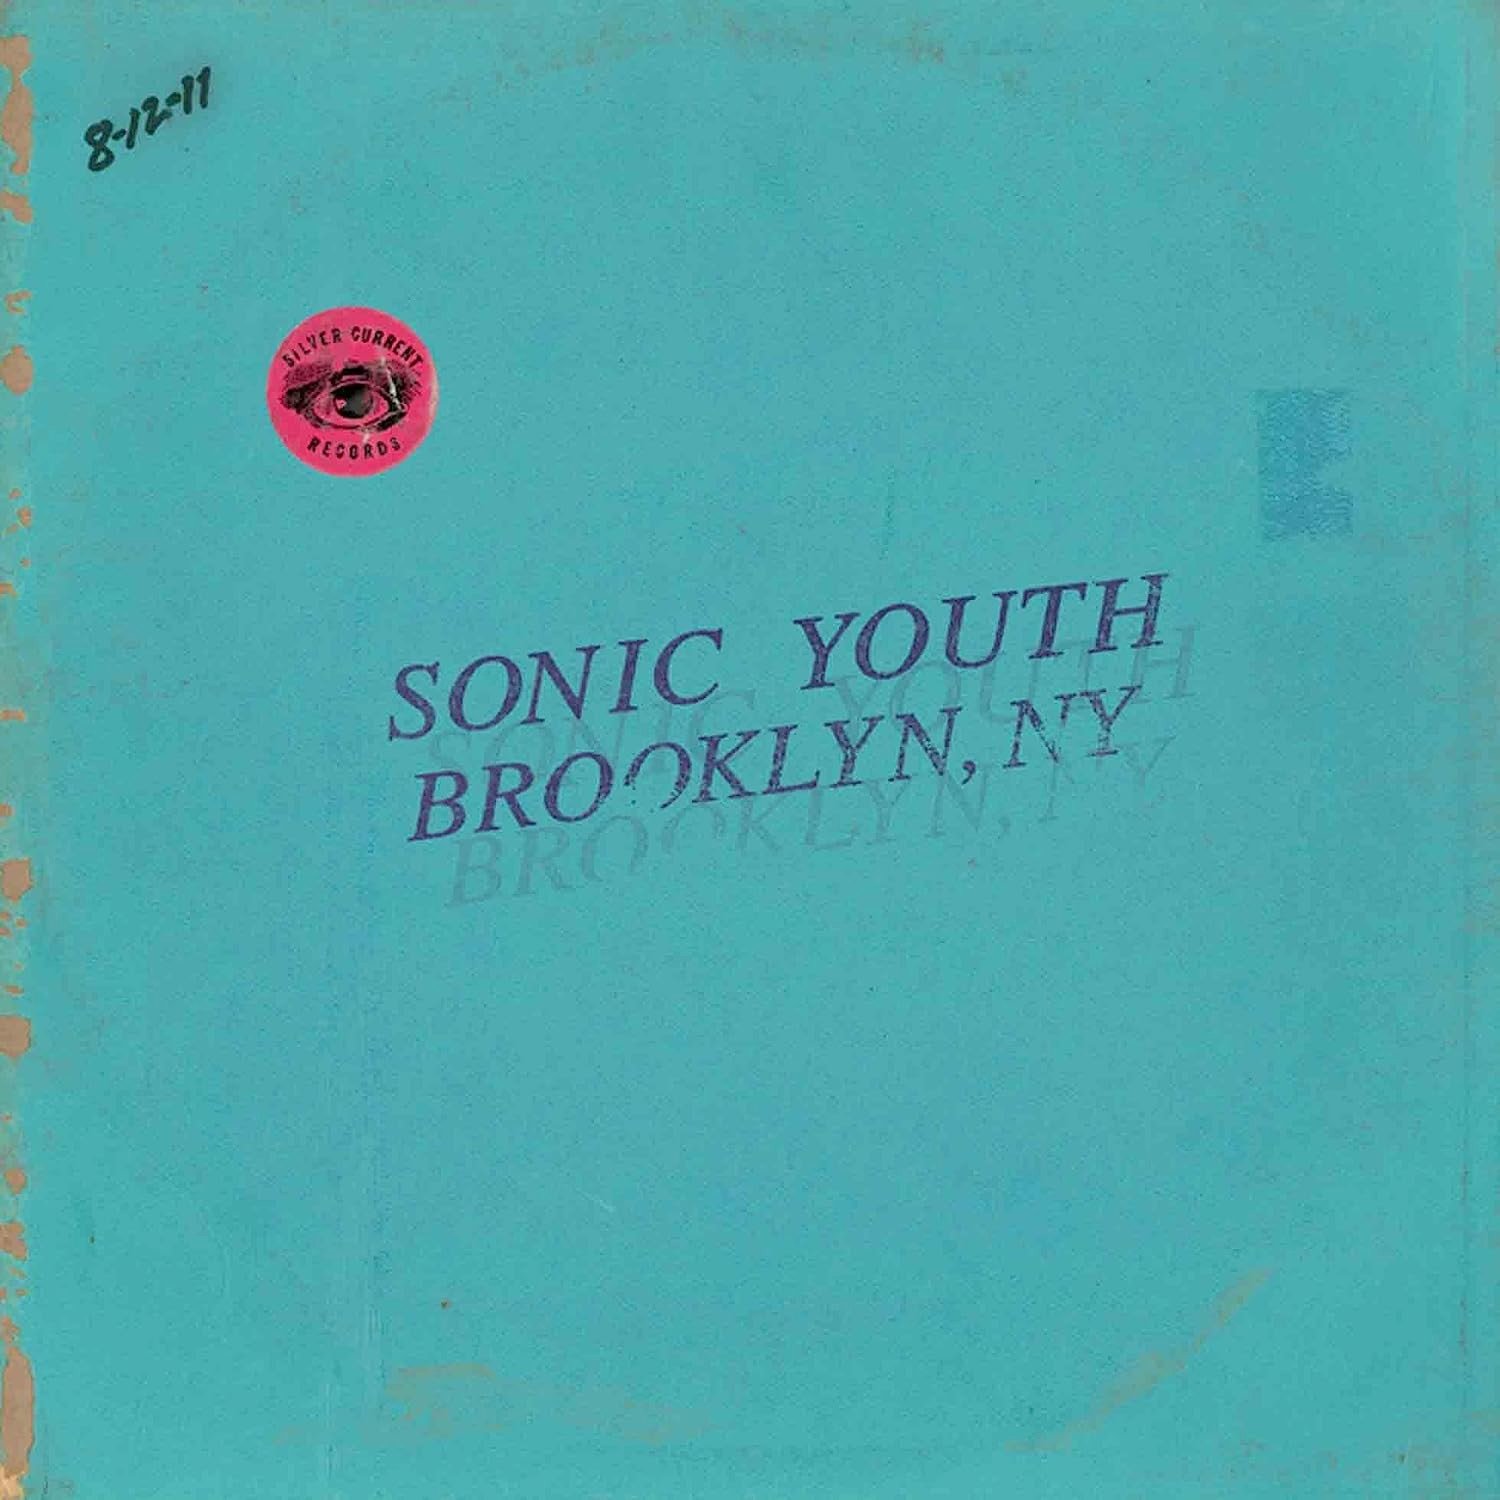 Sonic Youth - Live In Brooklyn 2011 (Violet & Pink Vinyl) - 2LP (LP)